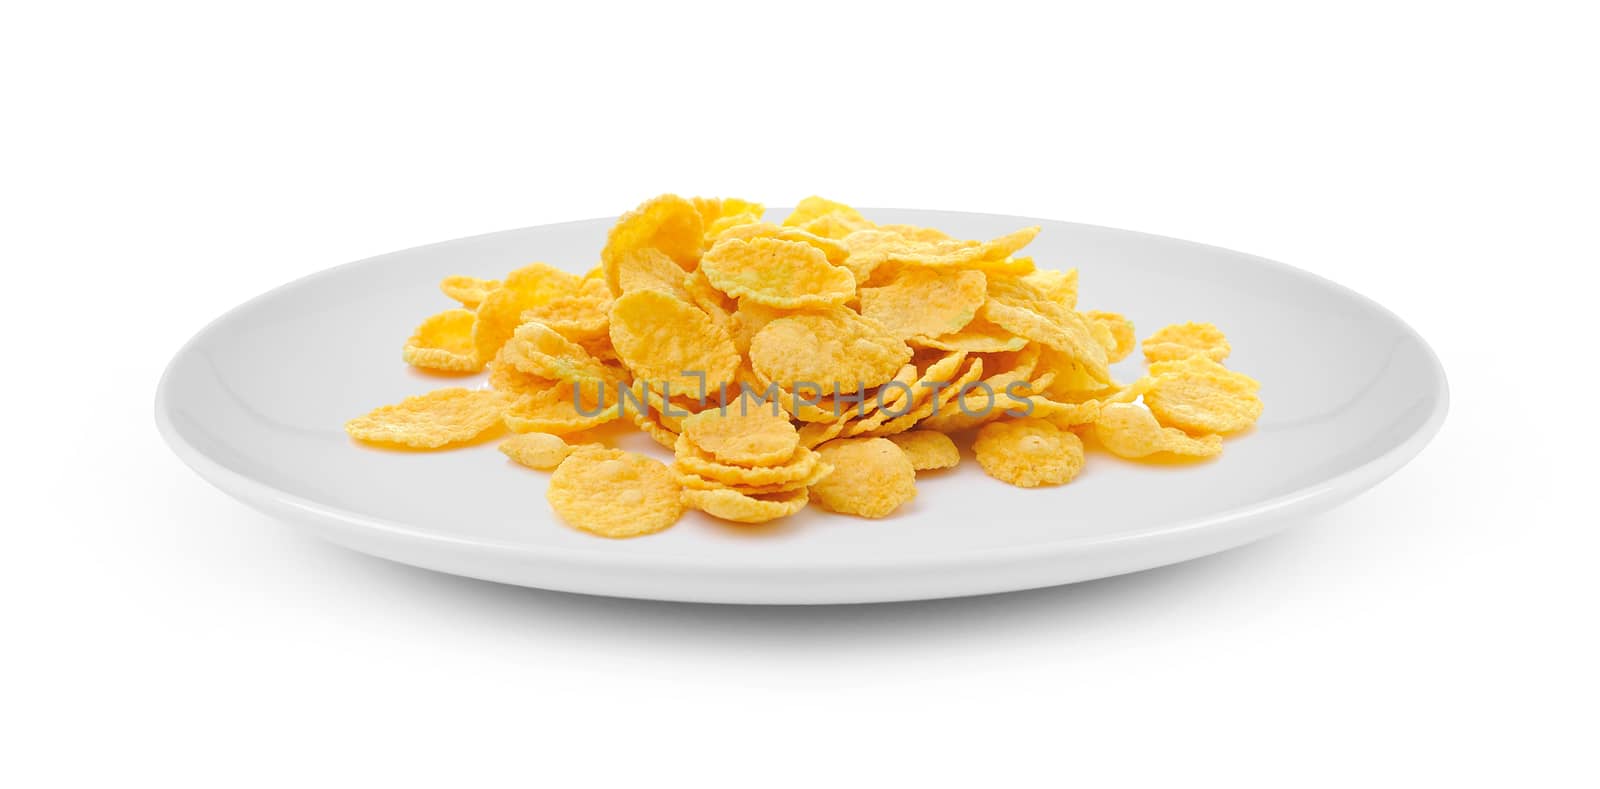 tasty cornflakes in plate isolated on white background by sommai